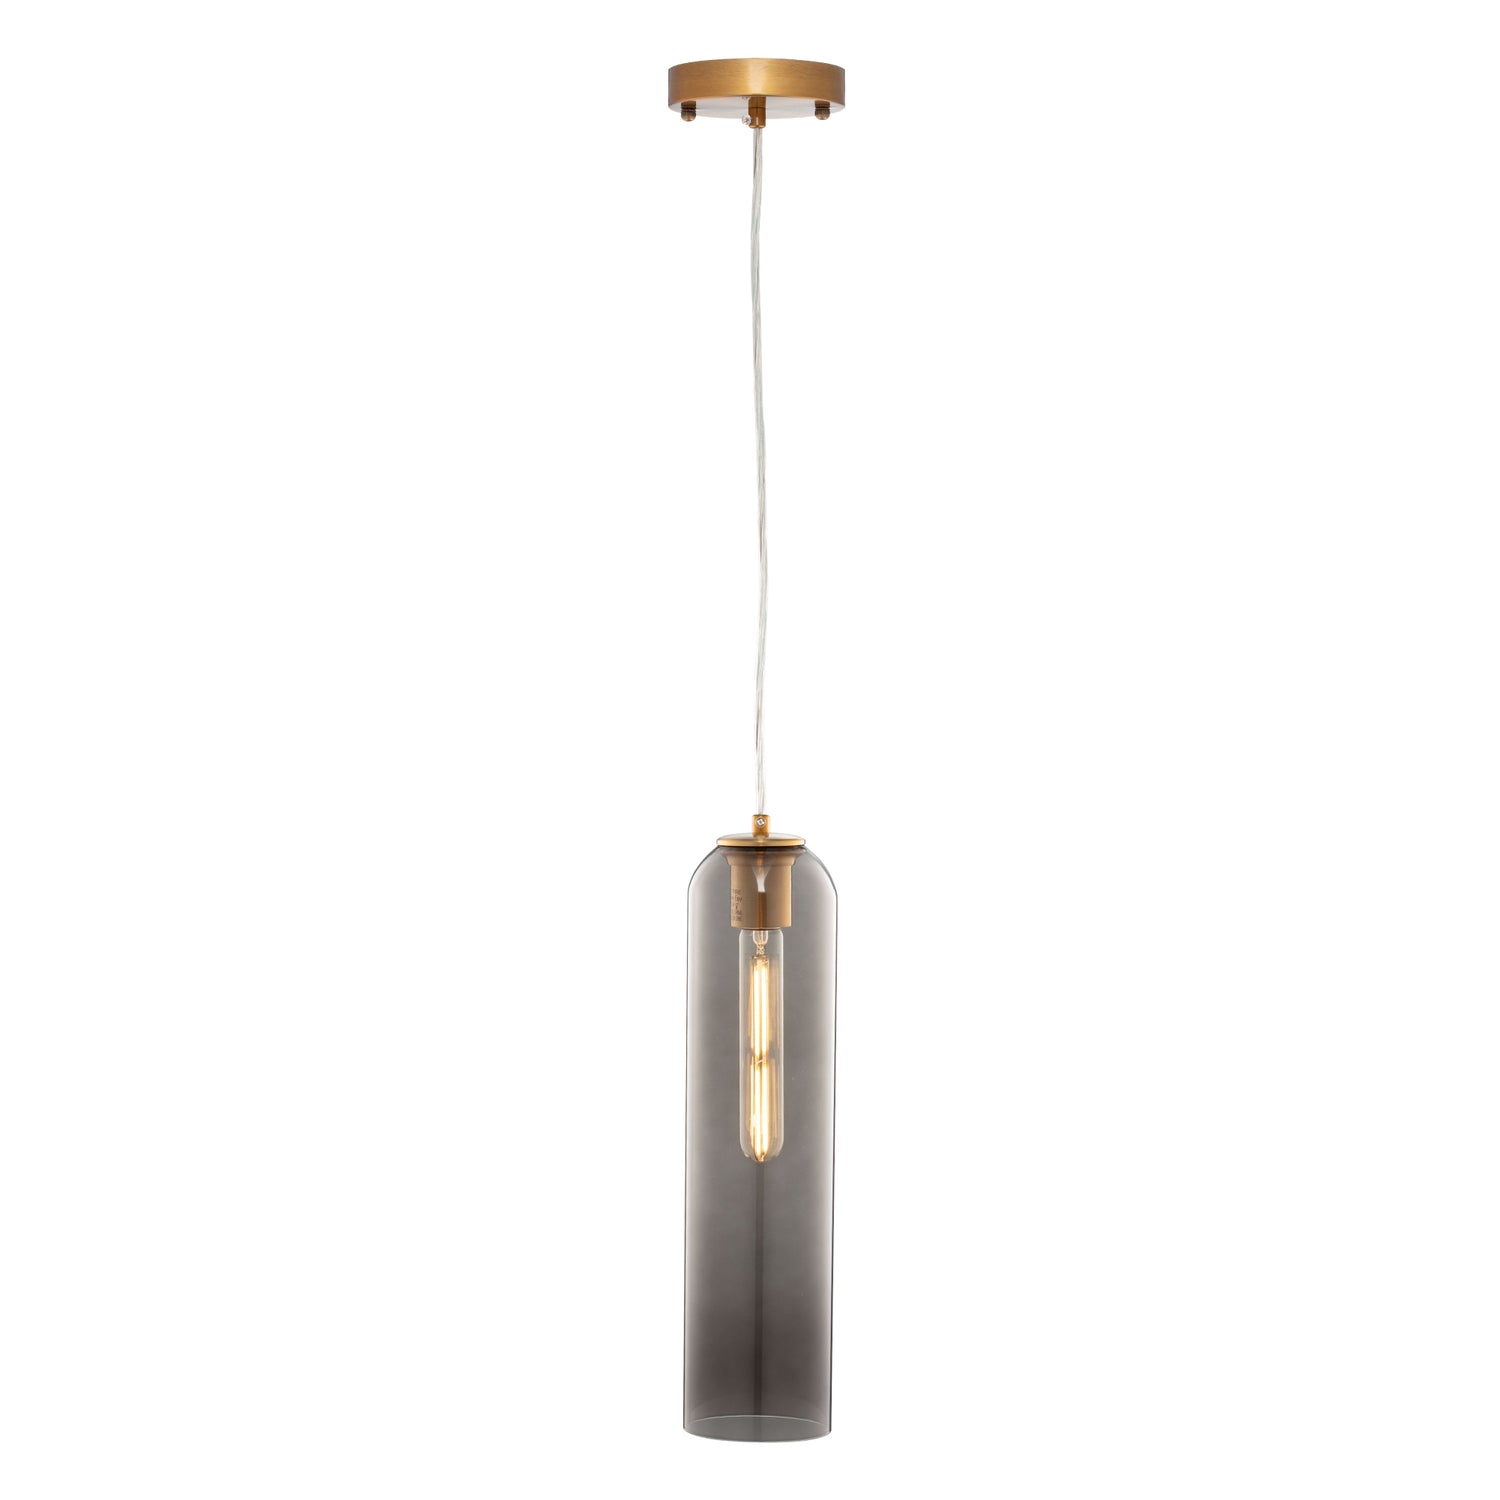 Hydra Pendant Light Collection features a 1-light pendant with a stunning design statement. Because of its thin width, it’s perfect for illuminating a compact entryway or lining a few up above the kitchen island to case a warm glow over morning meals. It looks incredible mounted in a series in the kitchen or hallway, or as an accent piece in the living room or bedroom to complement and brighten up your décor. 